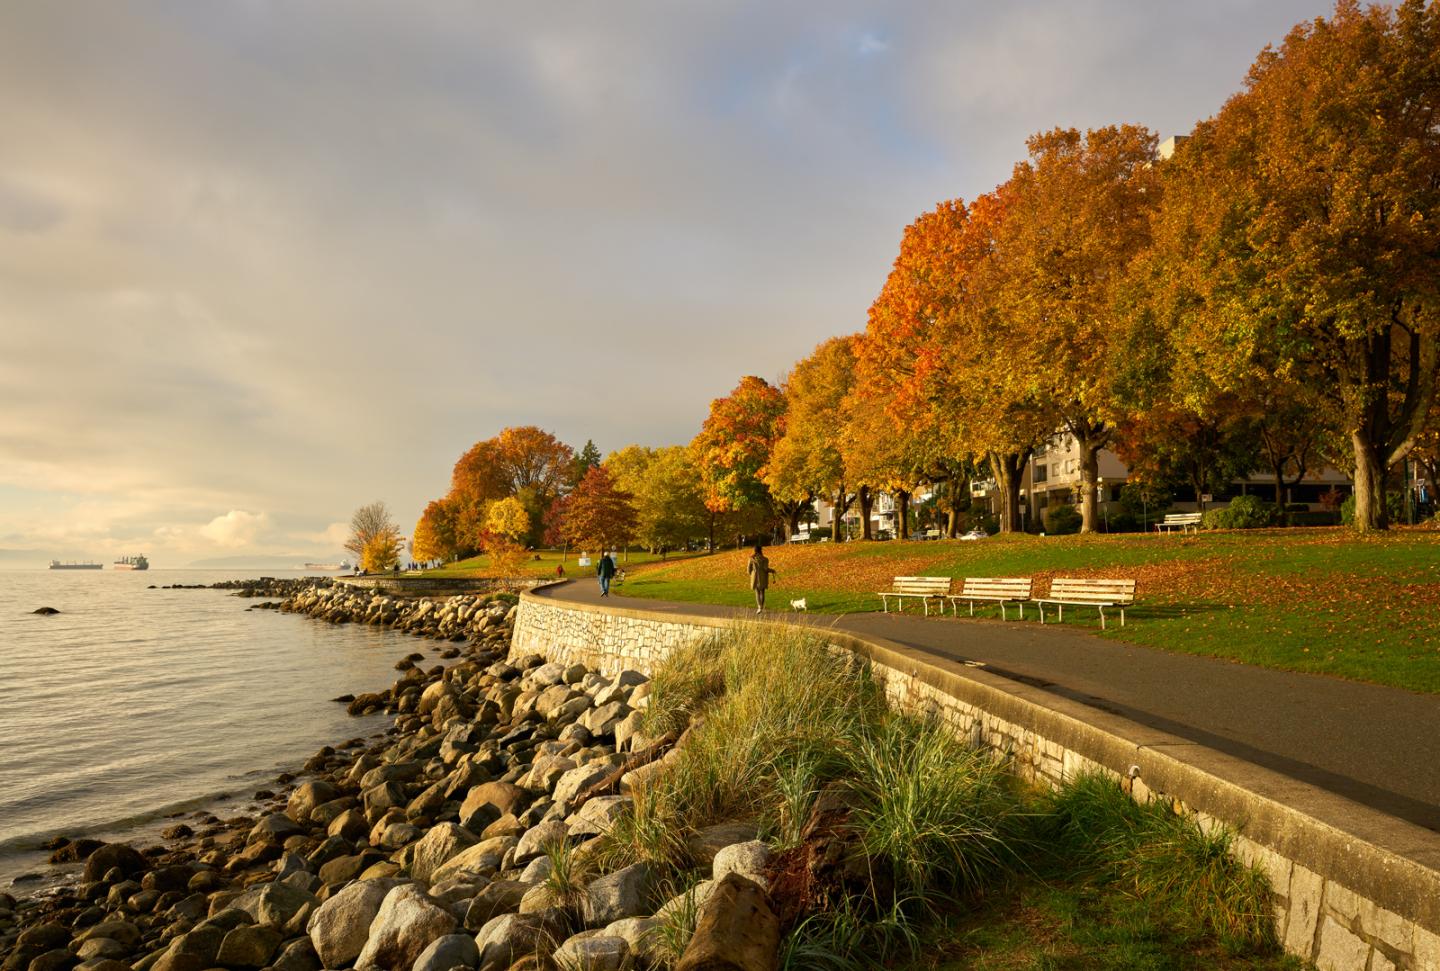 Person running along the Stanley park seawall among a row of trees with autumn leaves